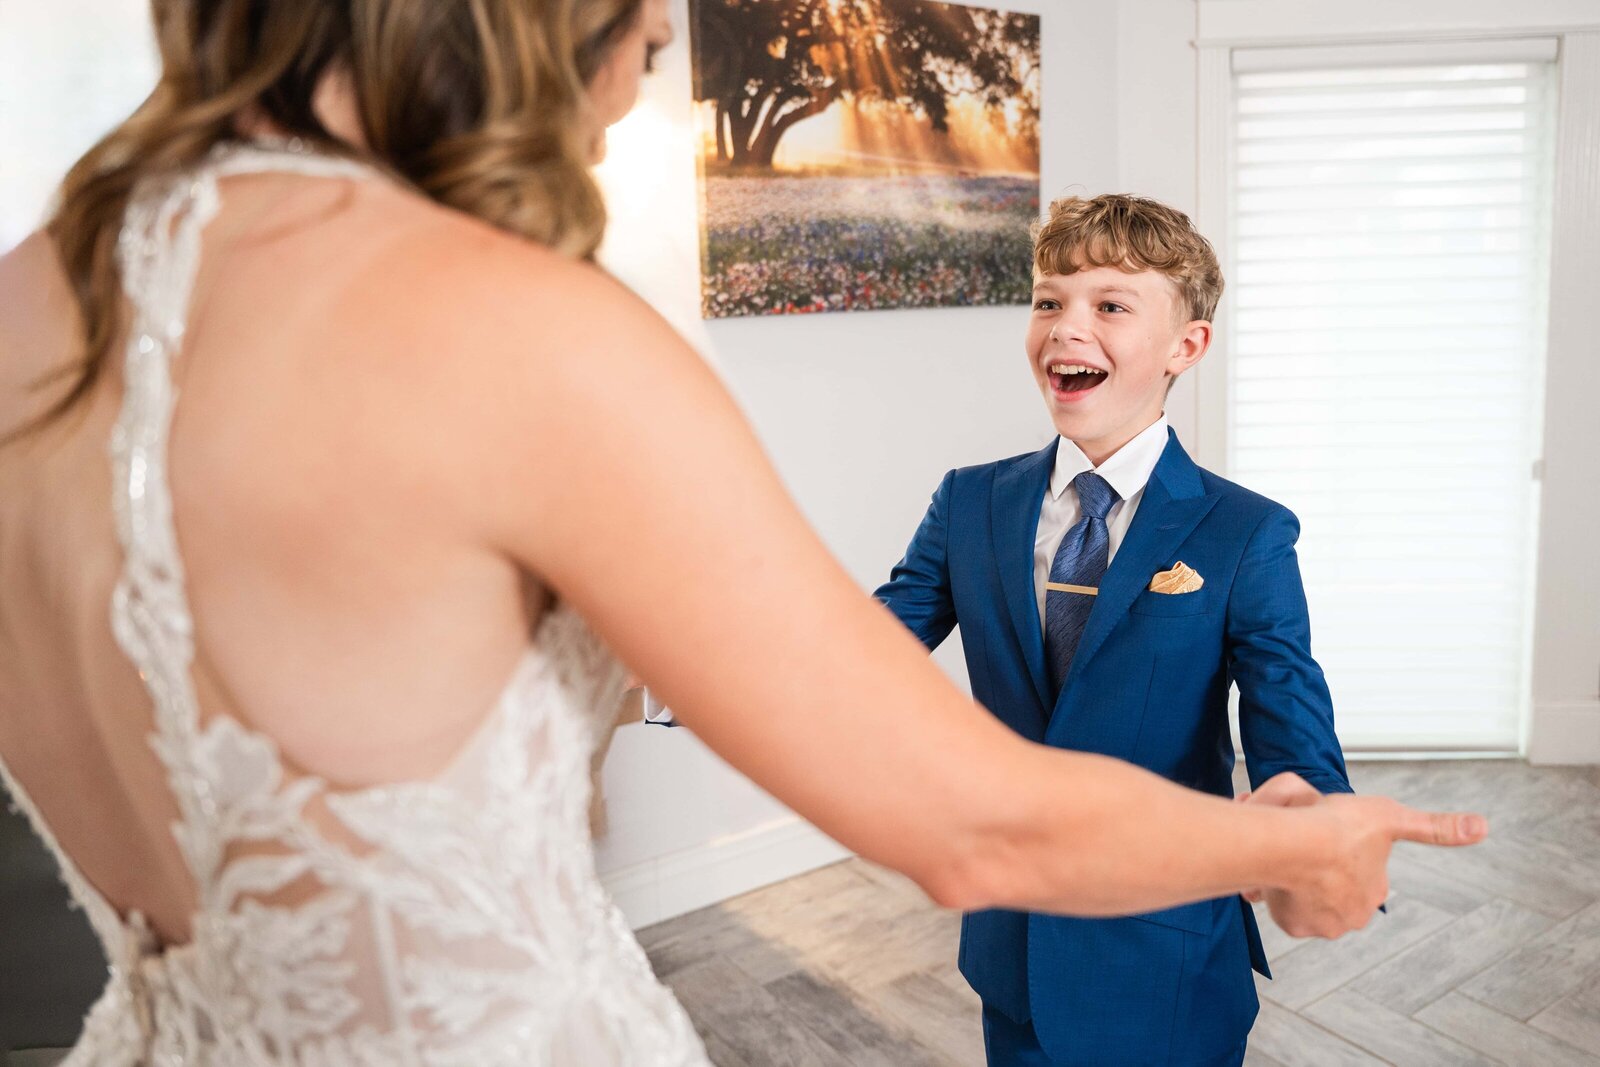 Son sees his mom in her wedding dress for the first time.